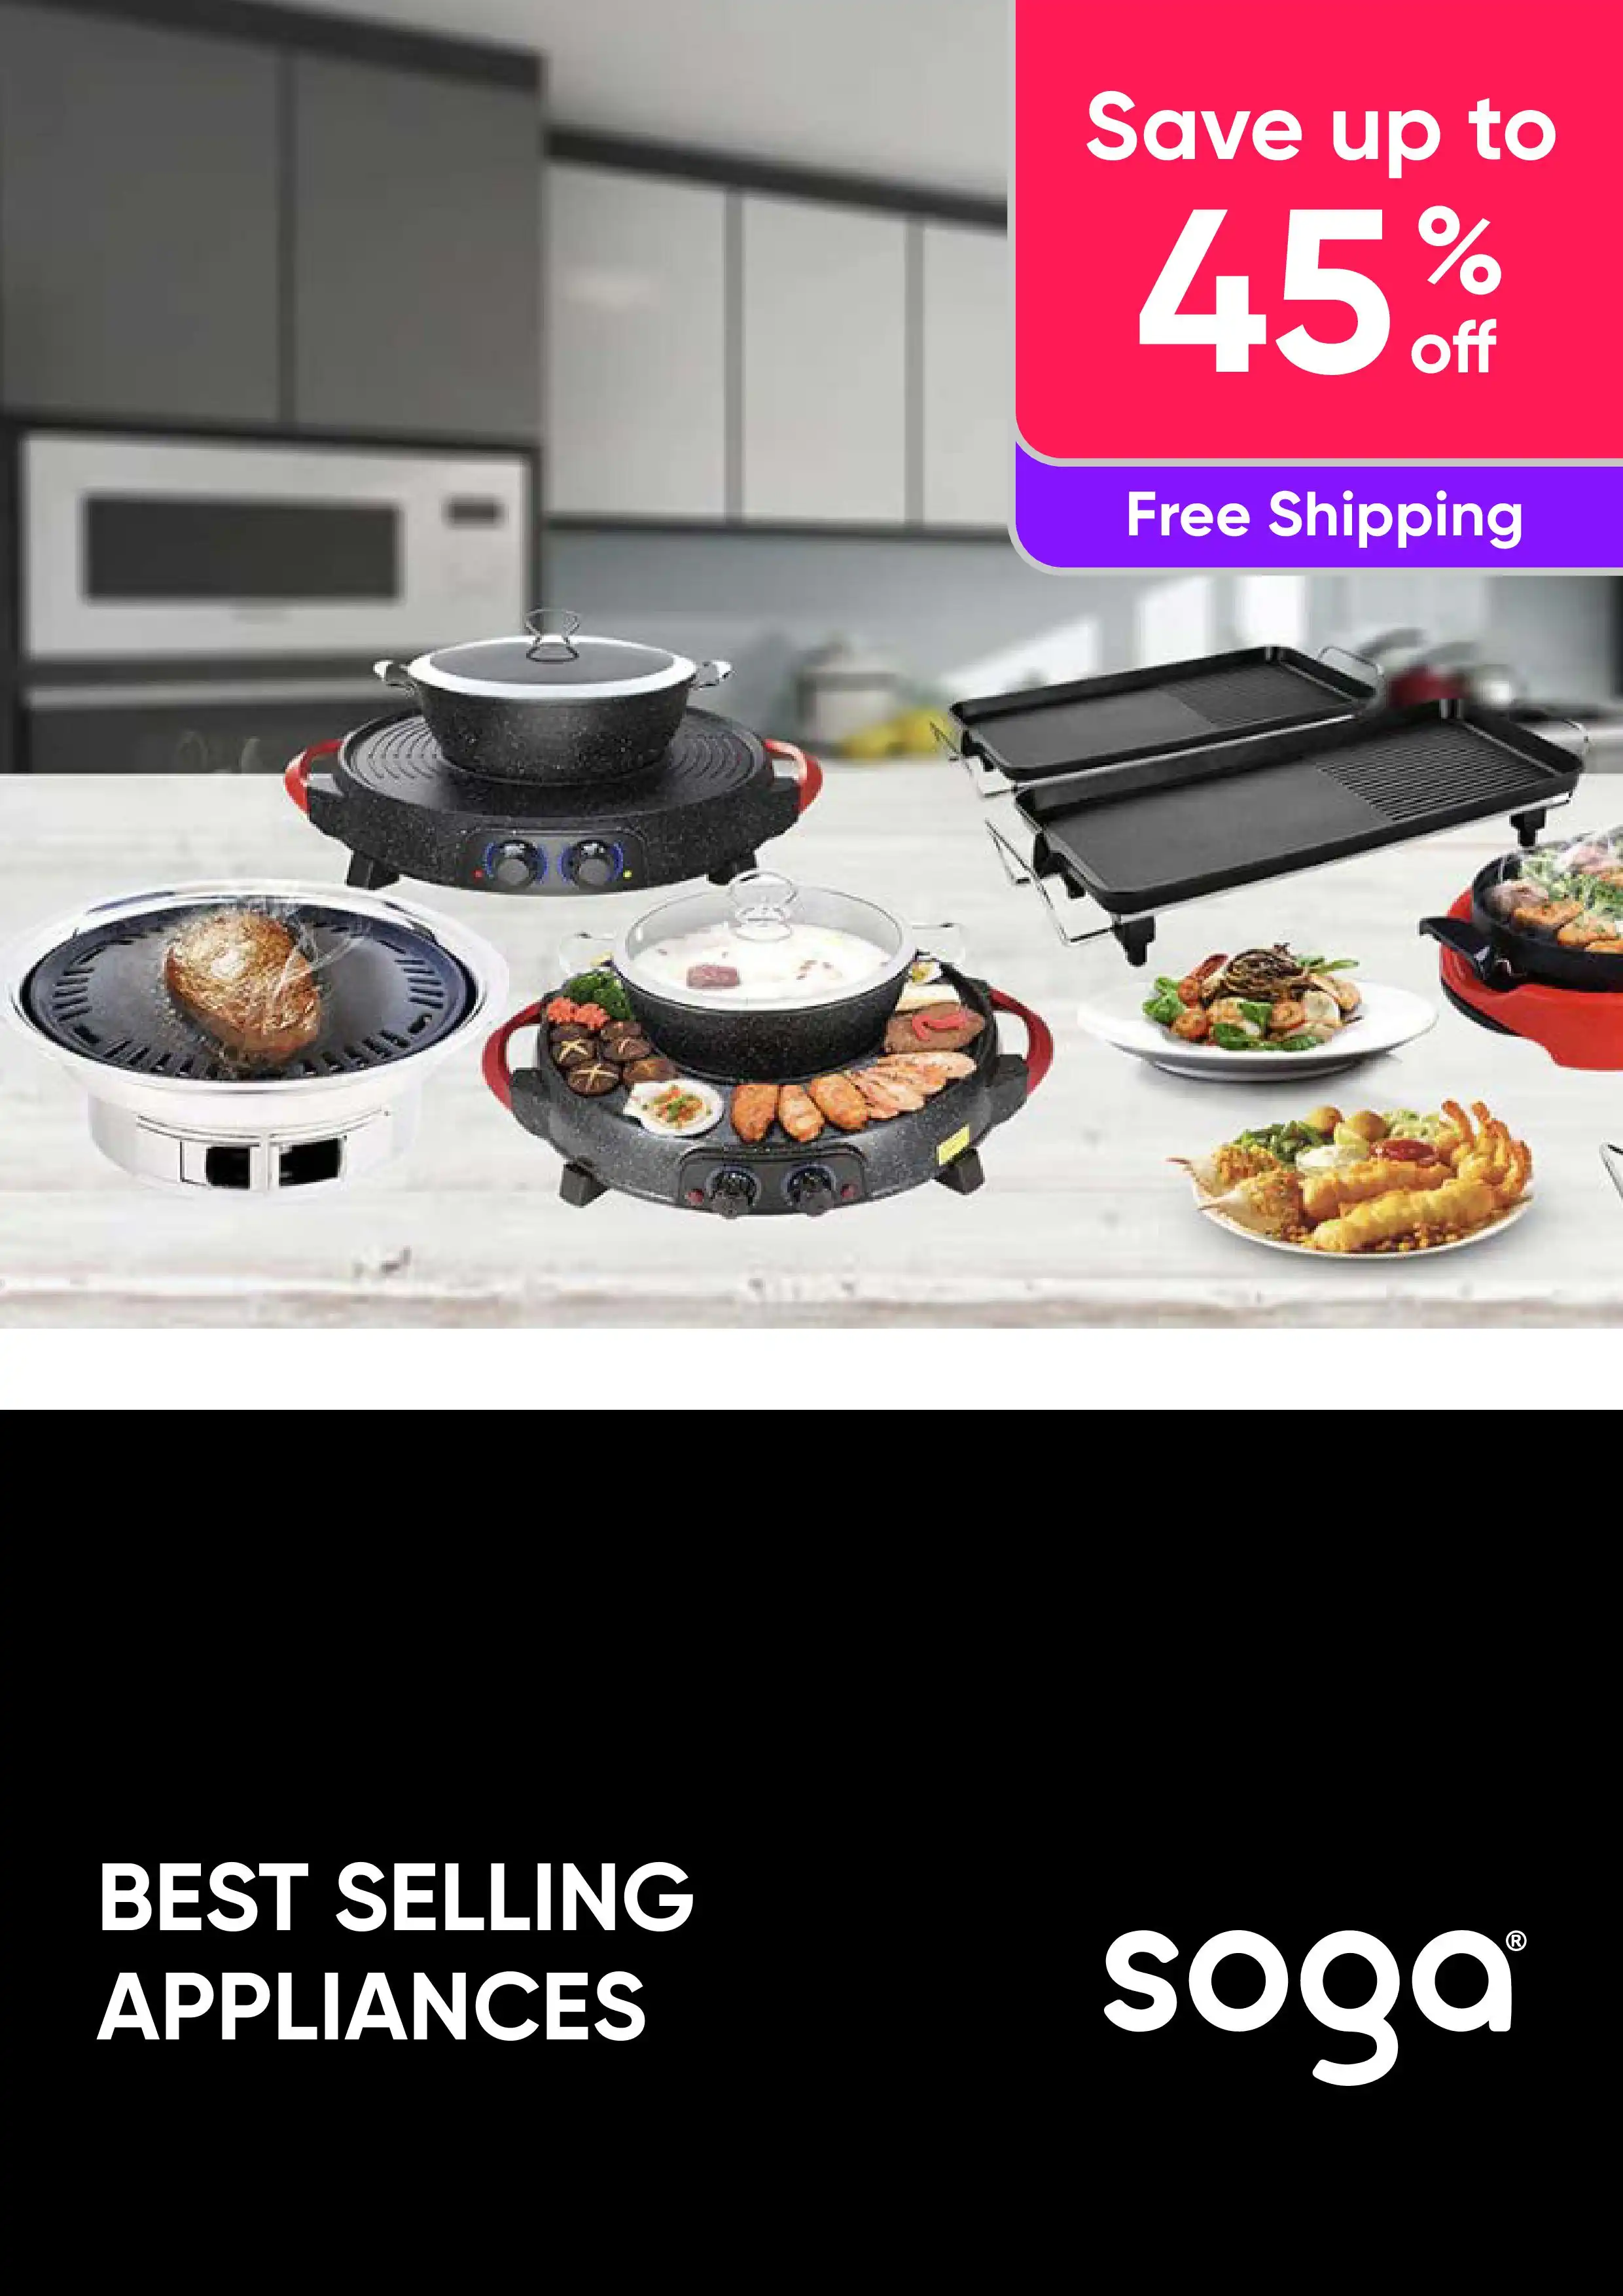 Best Selling Appliances - Up To 45% Off + Free Shipping